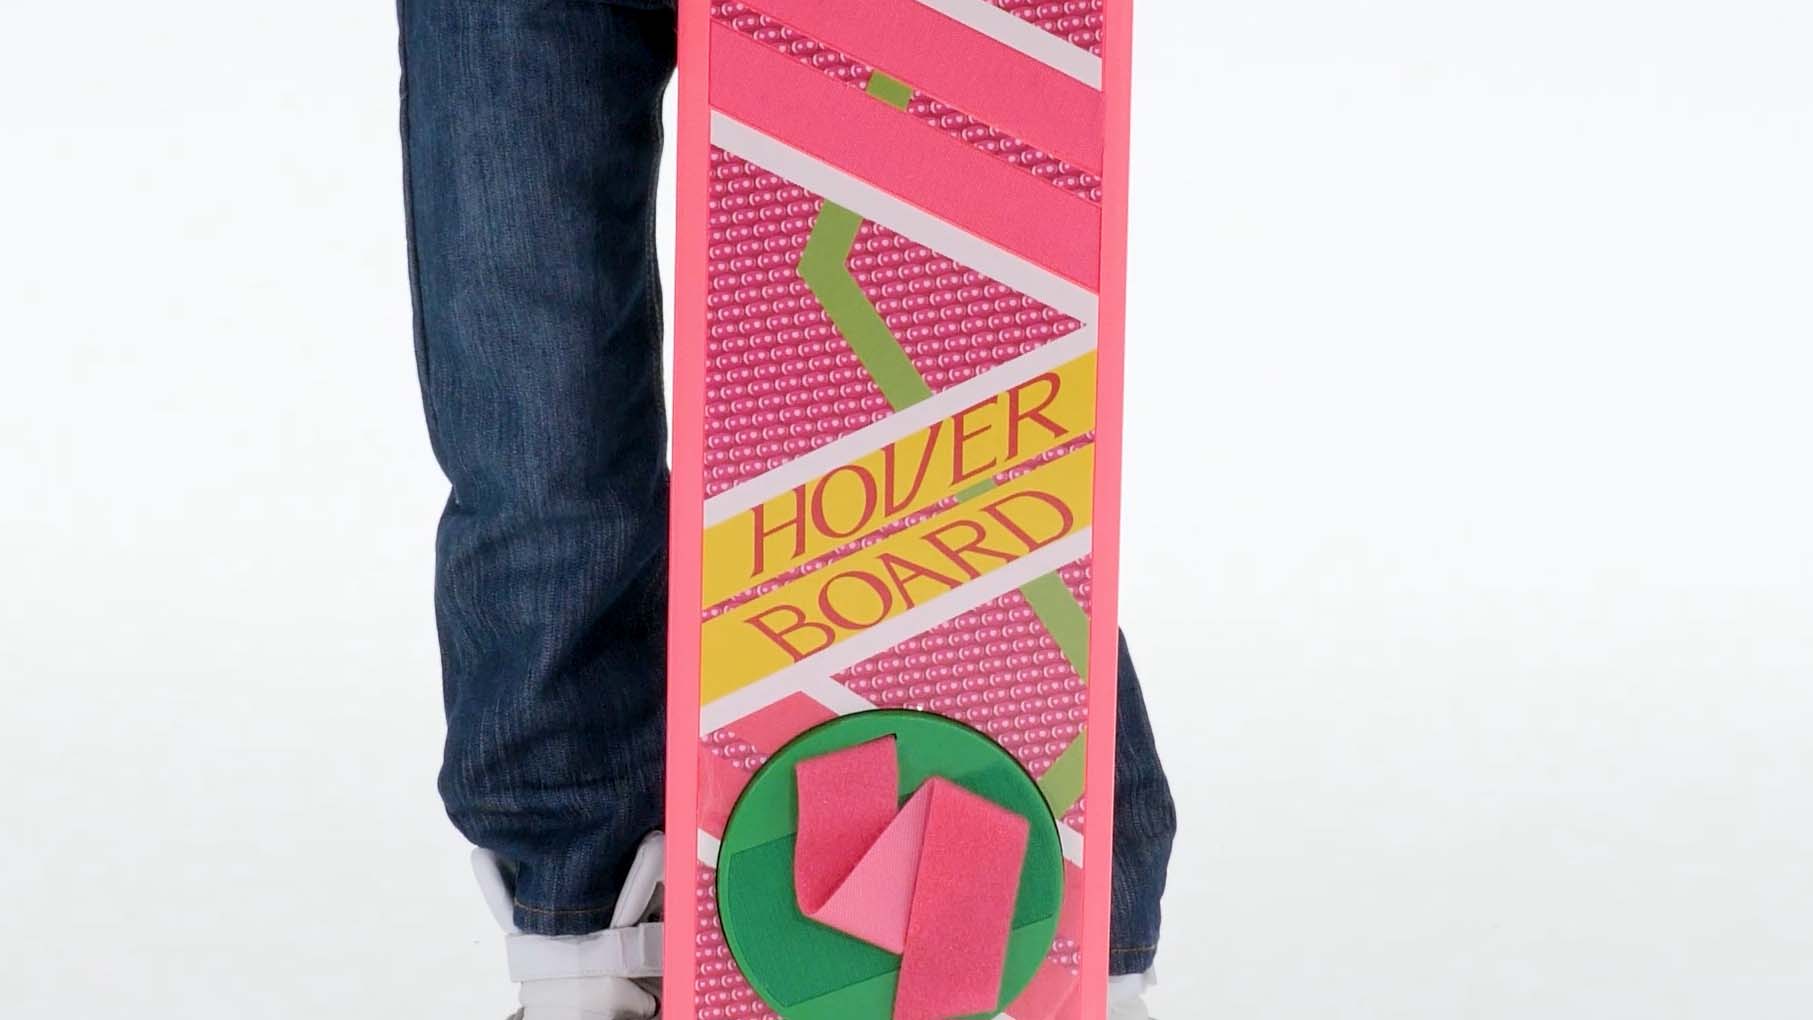 Ever wish you had a hoverboard just like Marty McFly in Back to the Future II? This Hoverboard doesn't really hover, but it's the perfect accessory to complete your futuristic look!